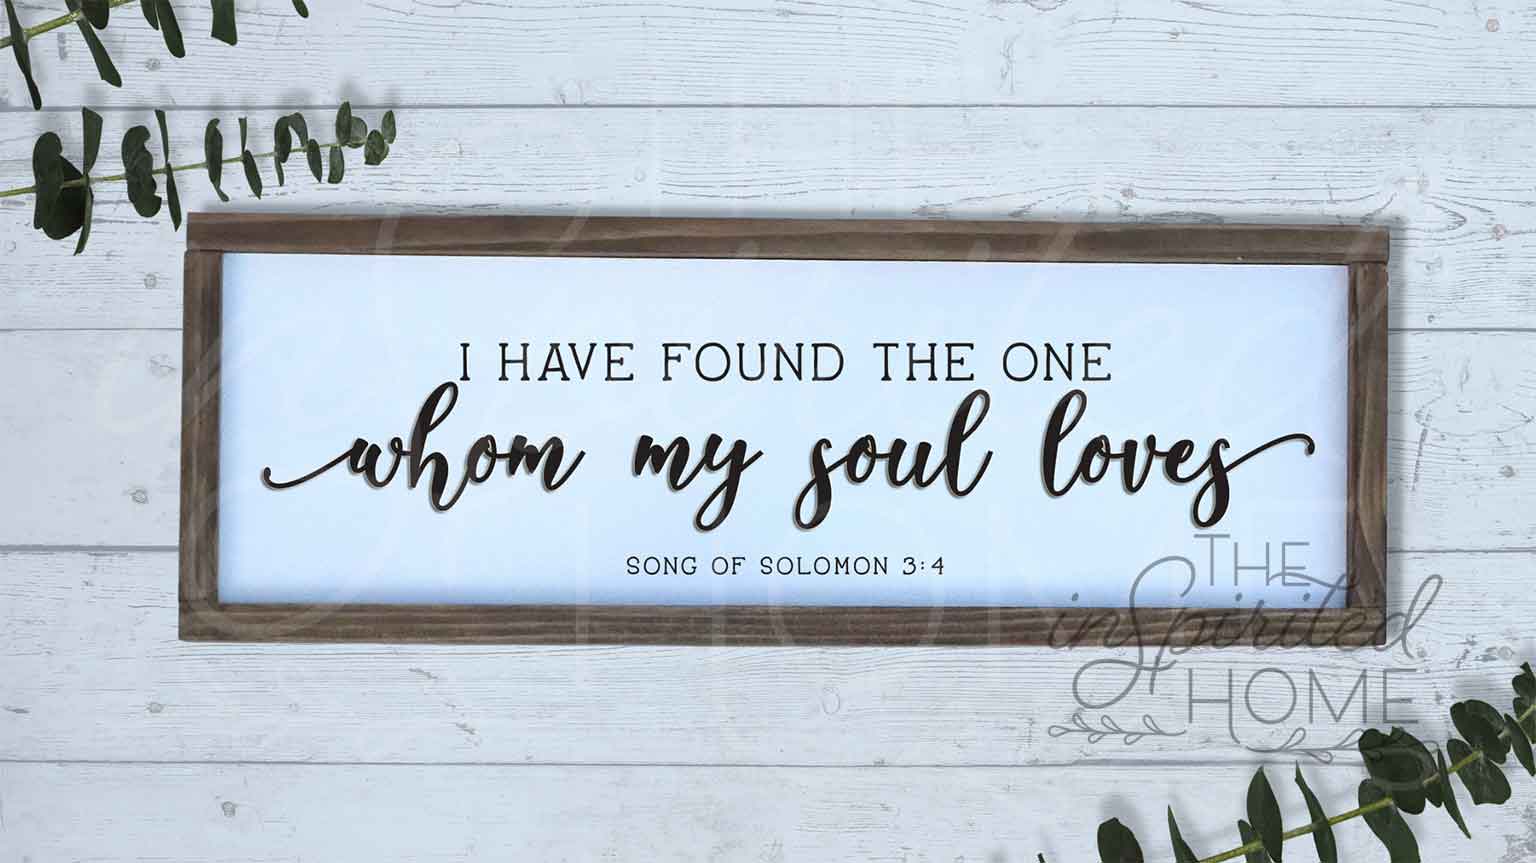 I have found the one whom my soul loves - Christian wood signs